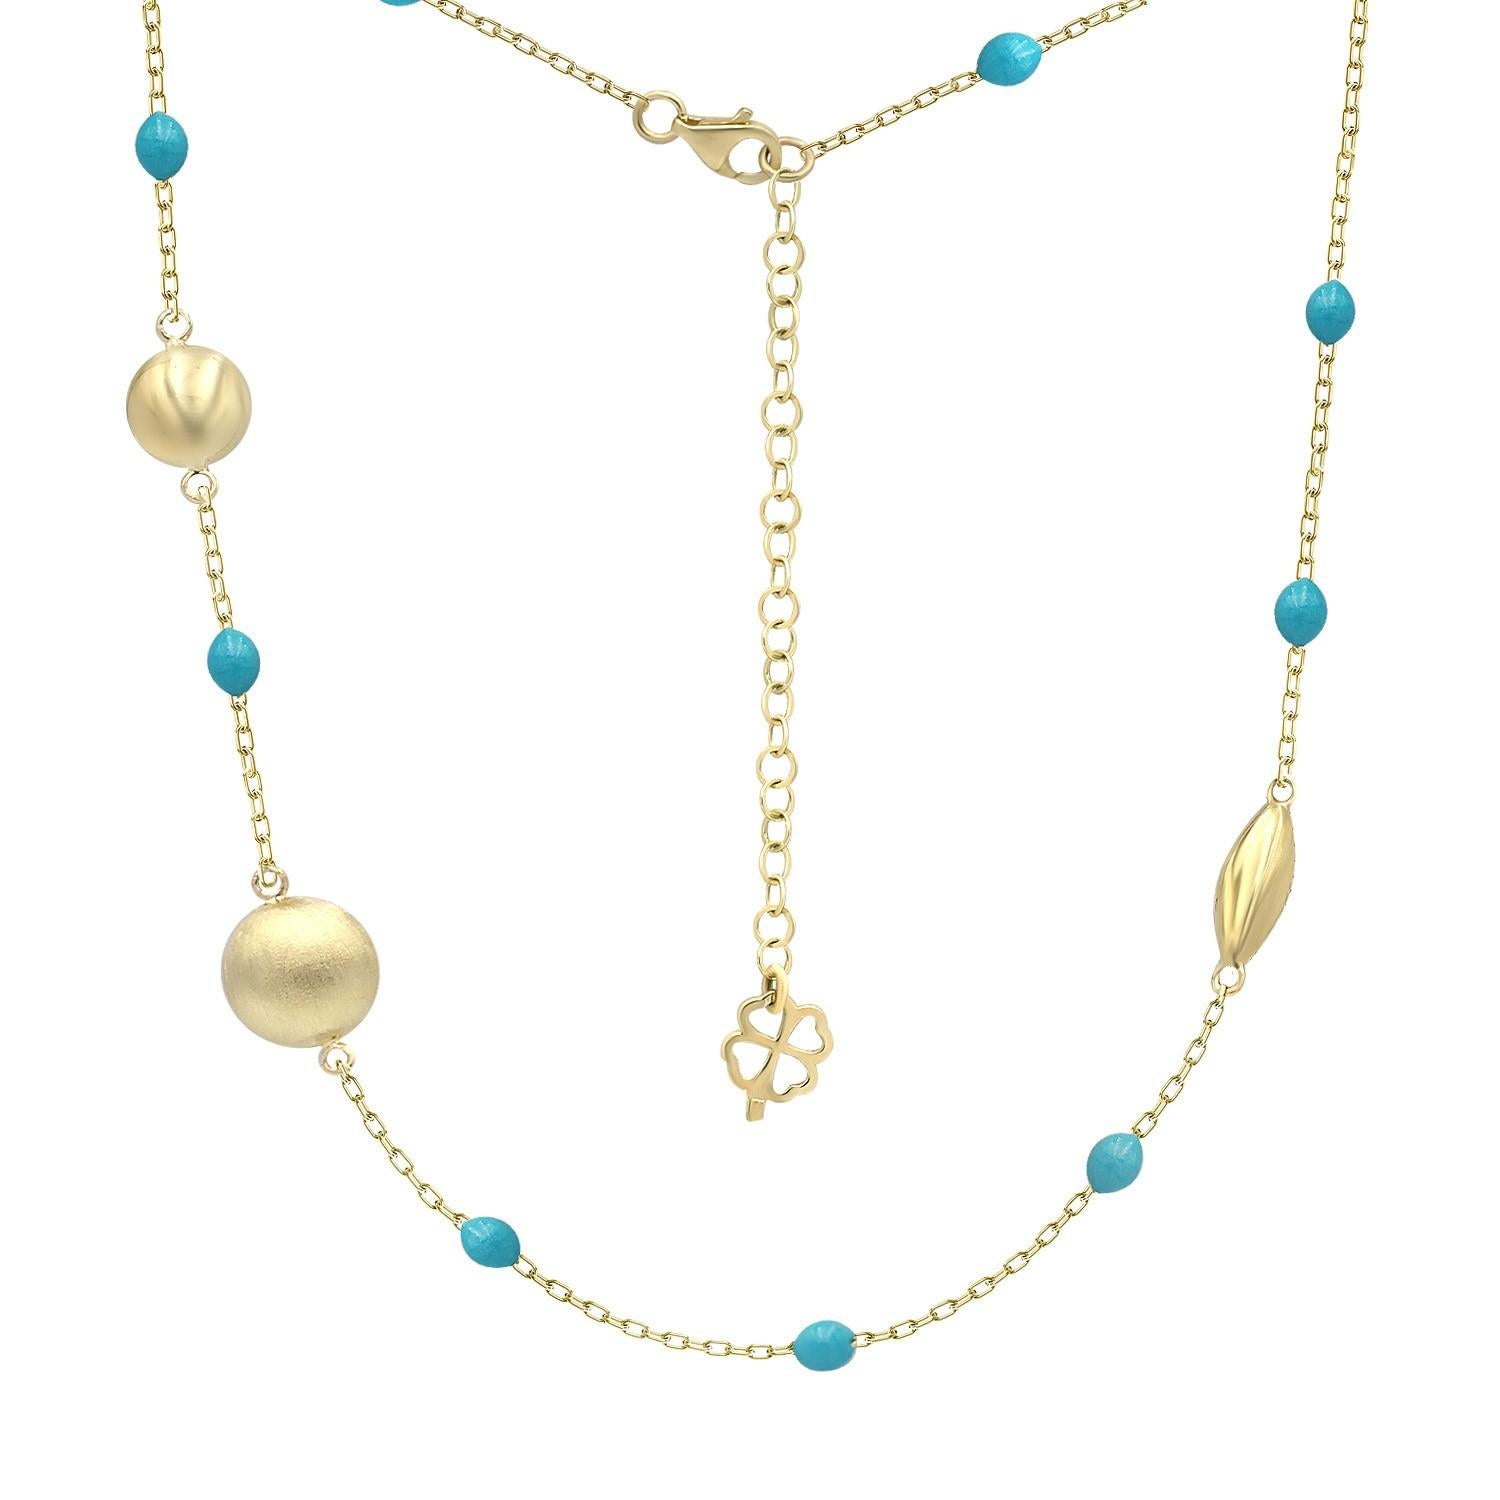 Yellow Gold 14K Necklace

Gold
Size 83 sm
Weight 11.15 gram

With a heritage of ancient fine Swiss jewelry traditions, NATKINA is a Geneva based jewellery brand, which creates modern jewellery masterpieces suitable for every day life.
It is our